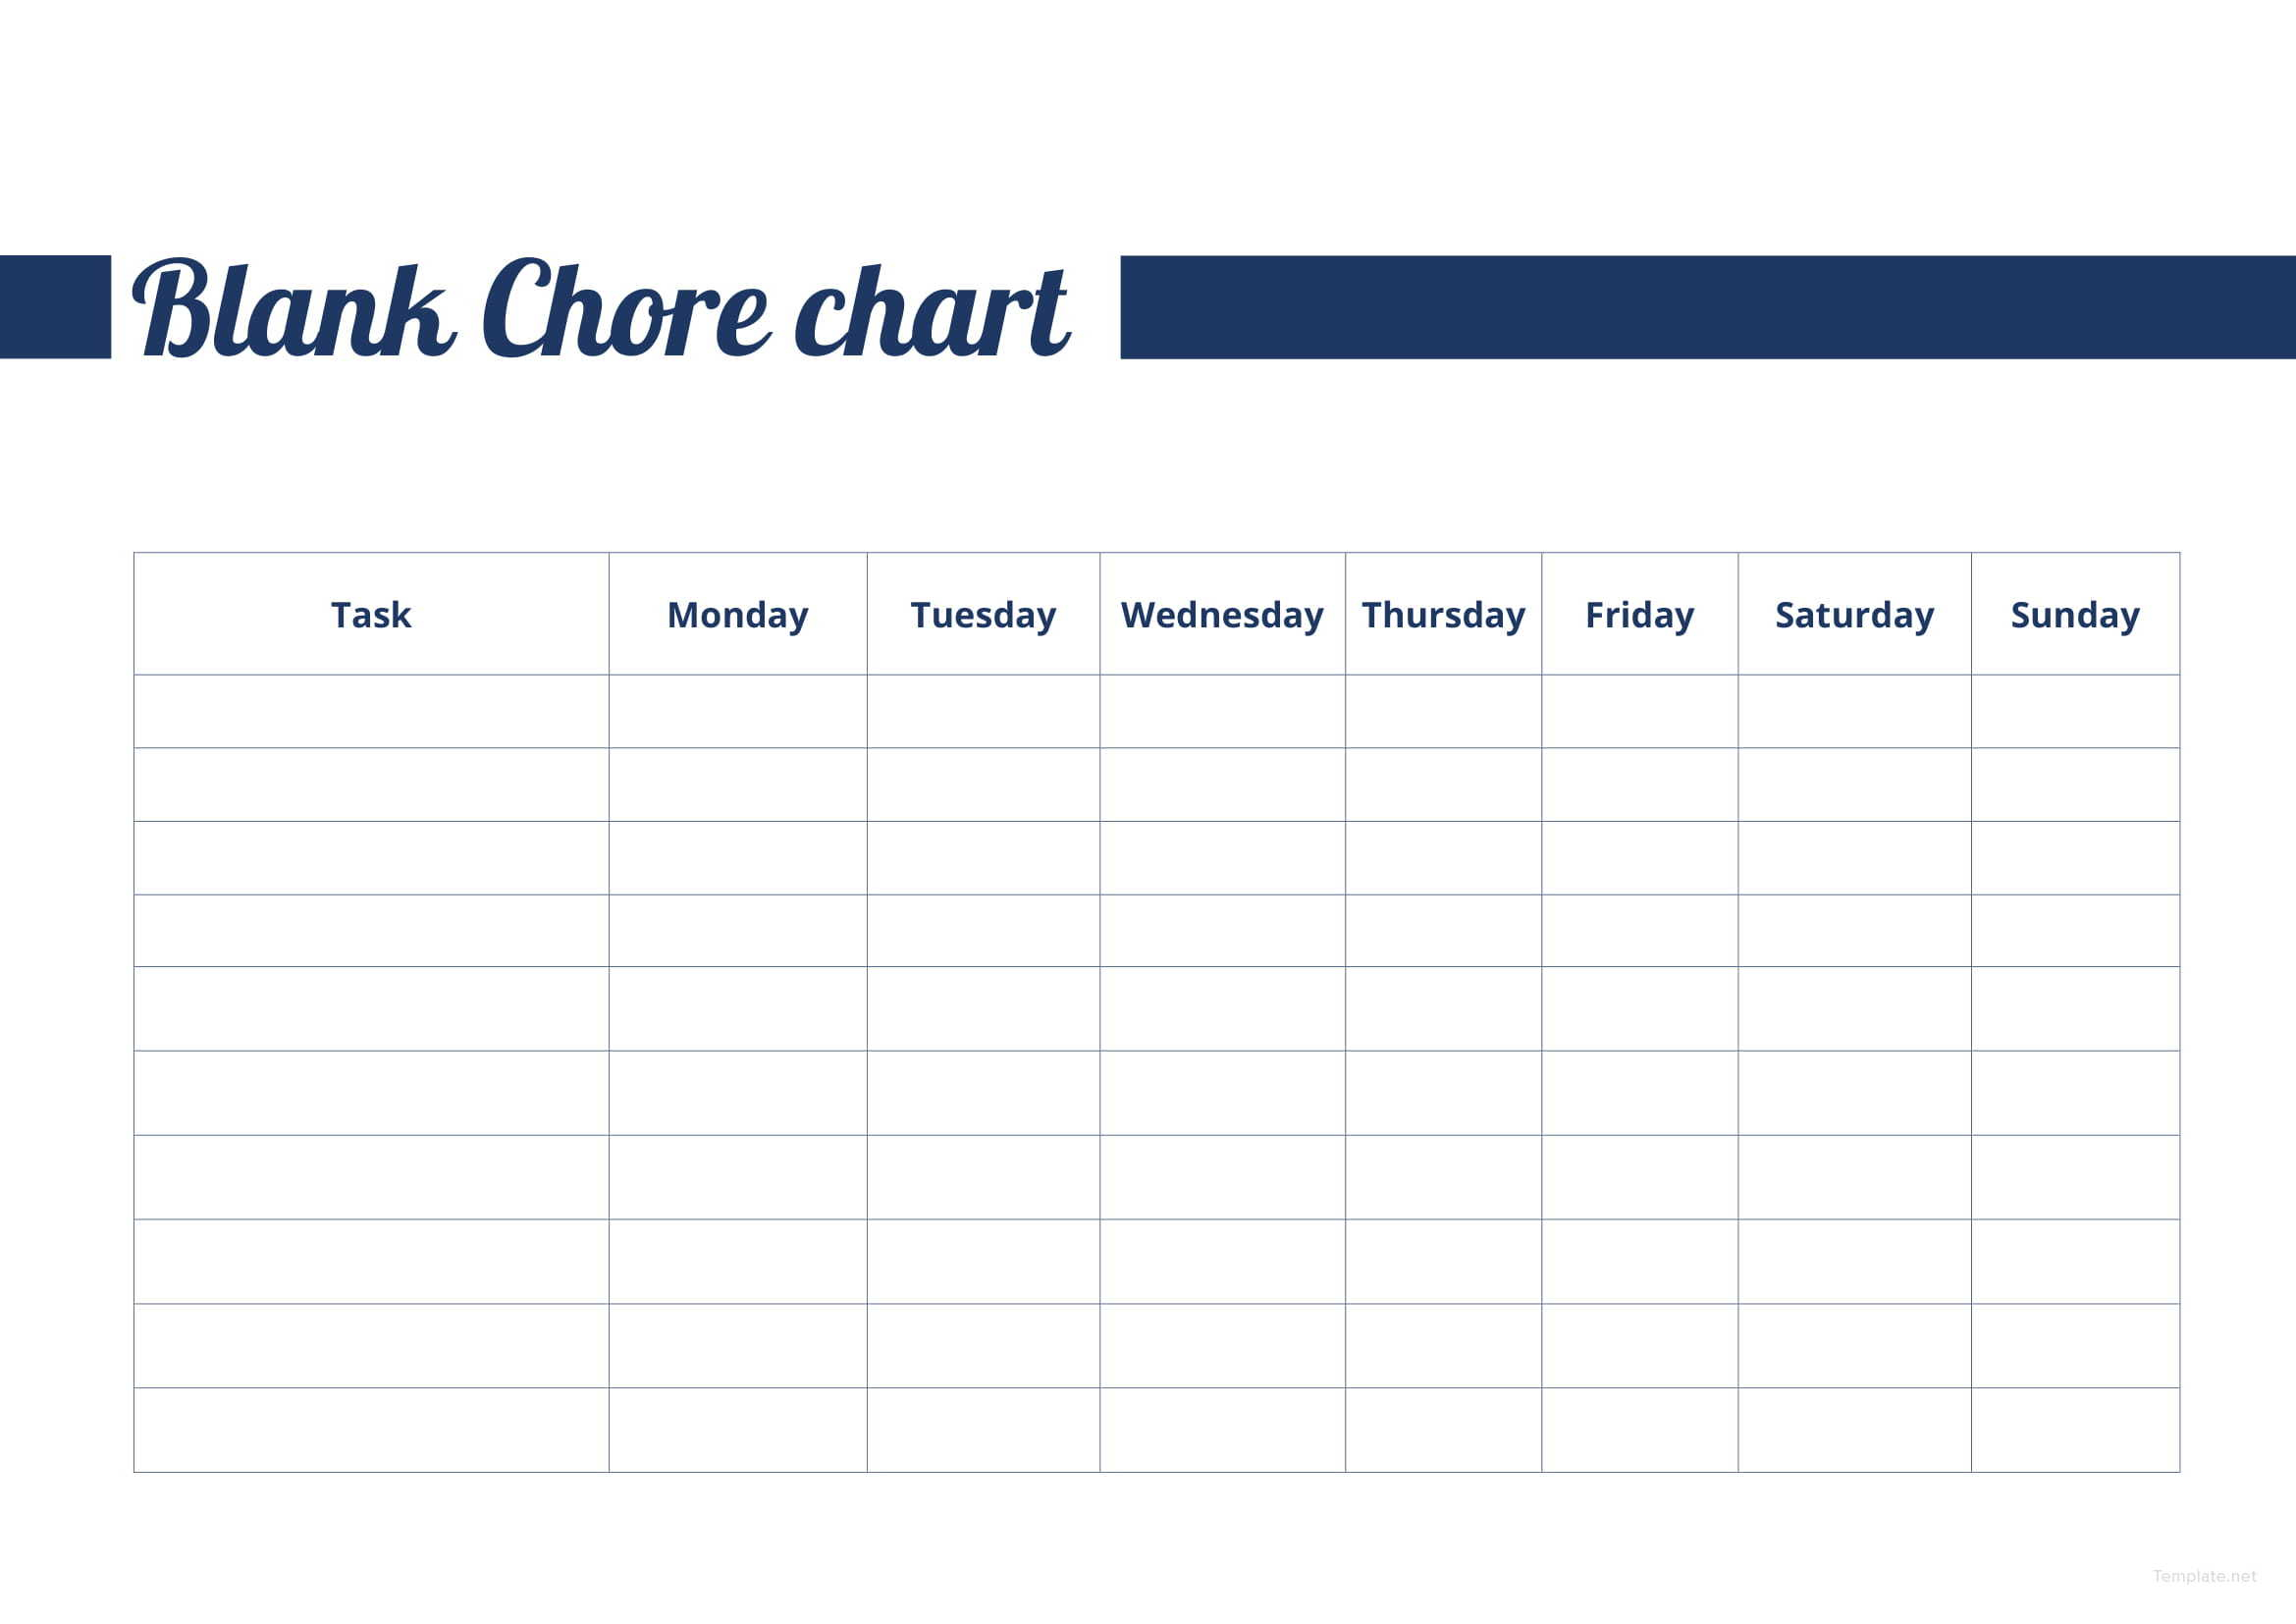 Blank Chore Chart Template In Microsoft Word Template